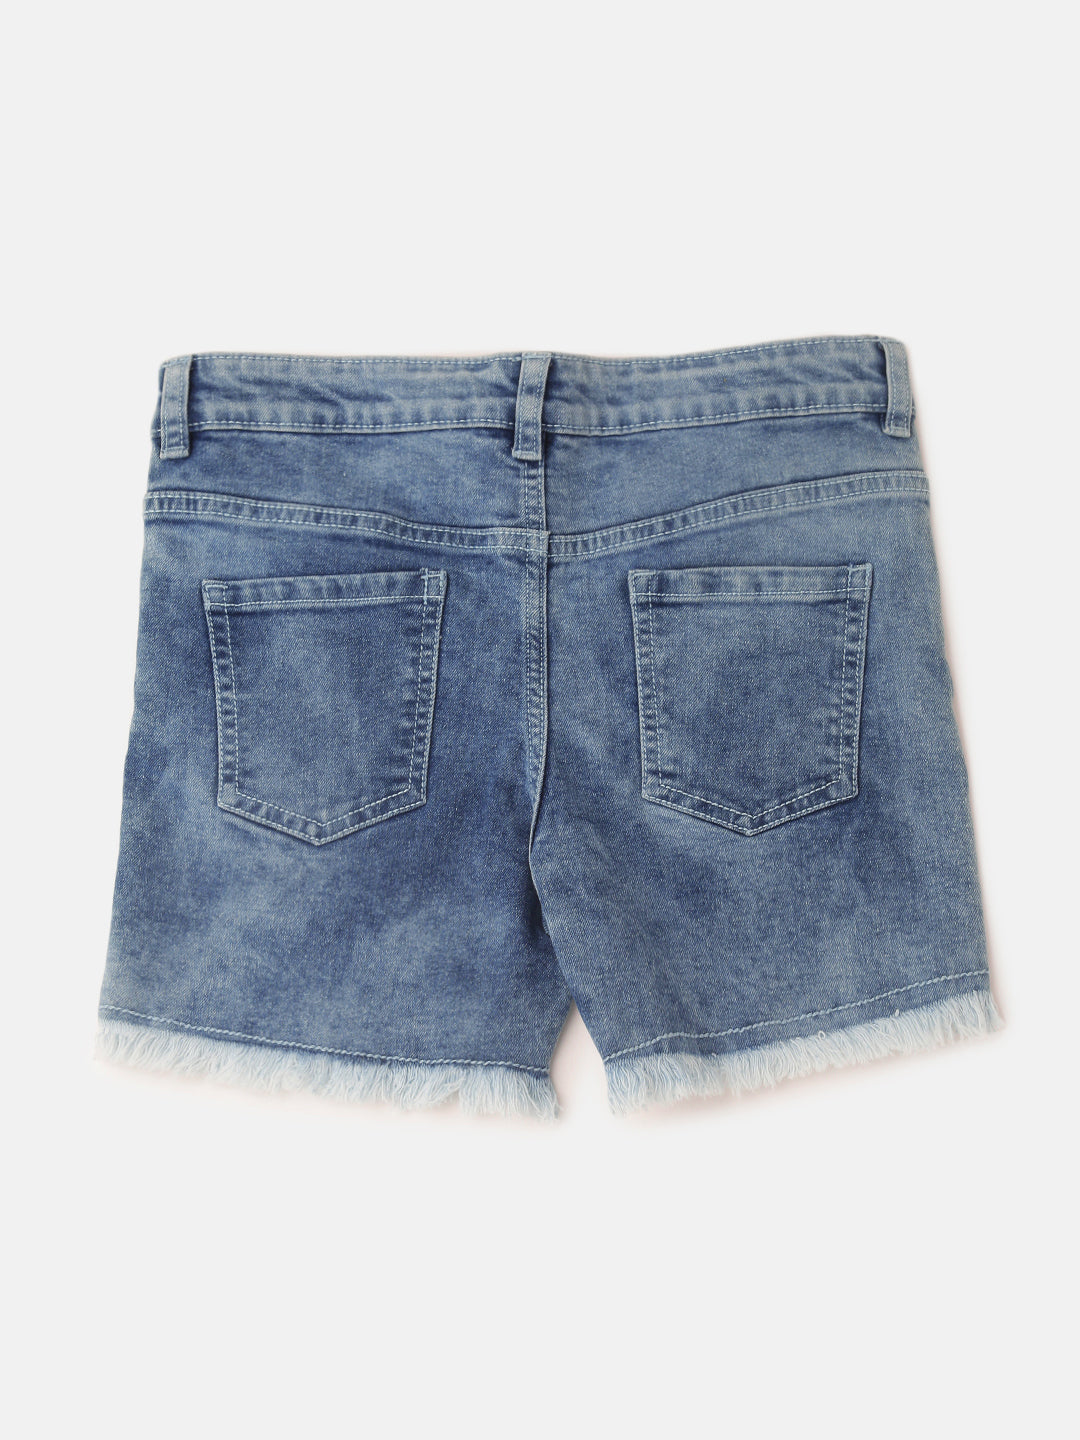 Happy Slender Child Girl Full Growth in Denim Shorts with Bare Legs Stock  Image - Image of child, graceful: 112284649